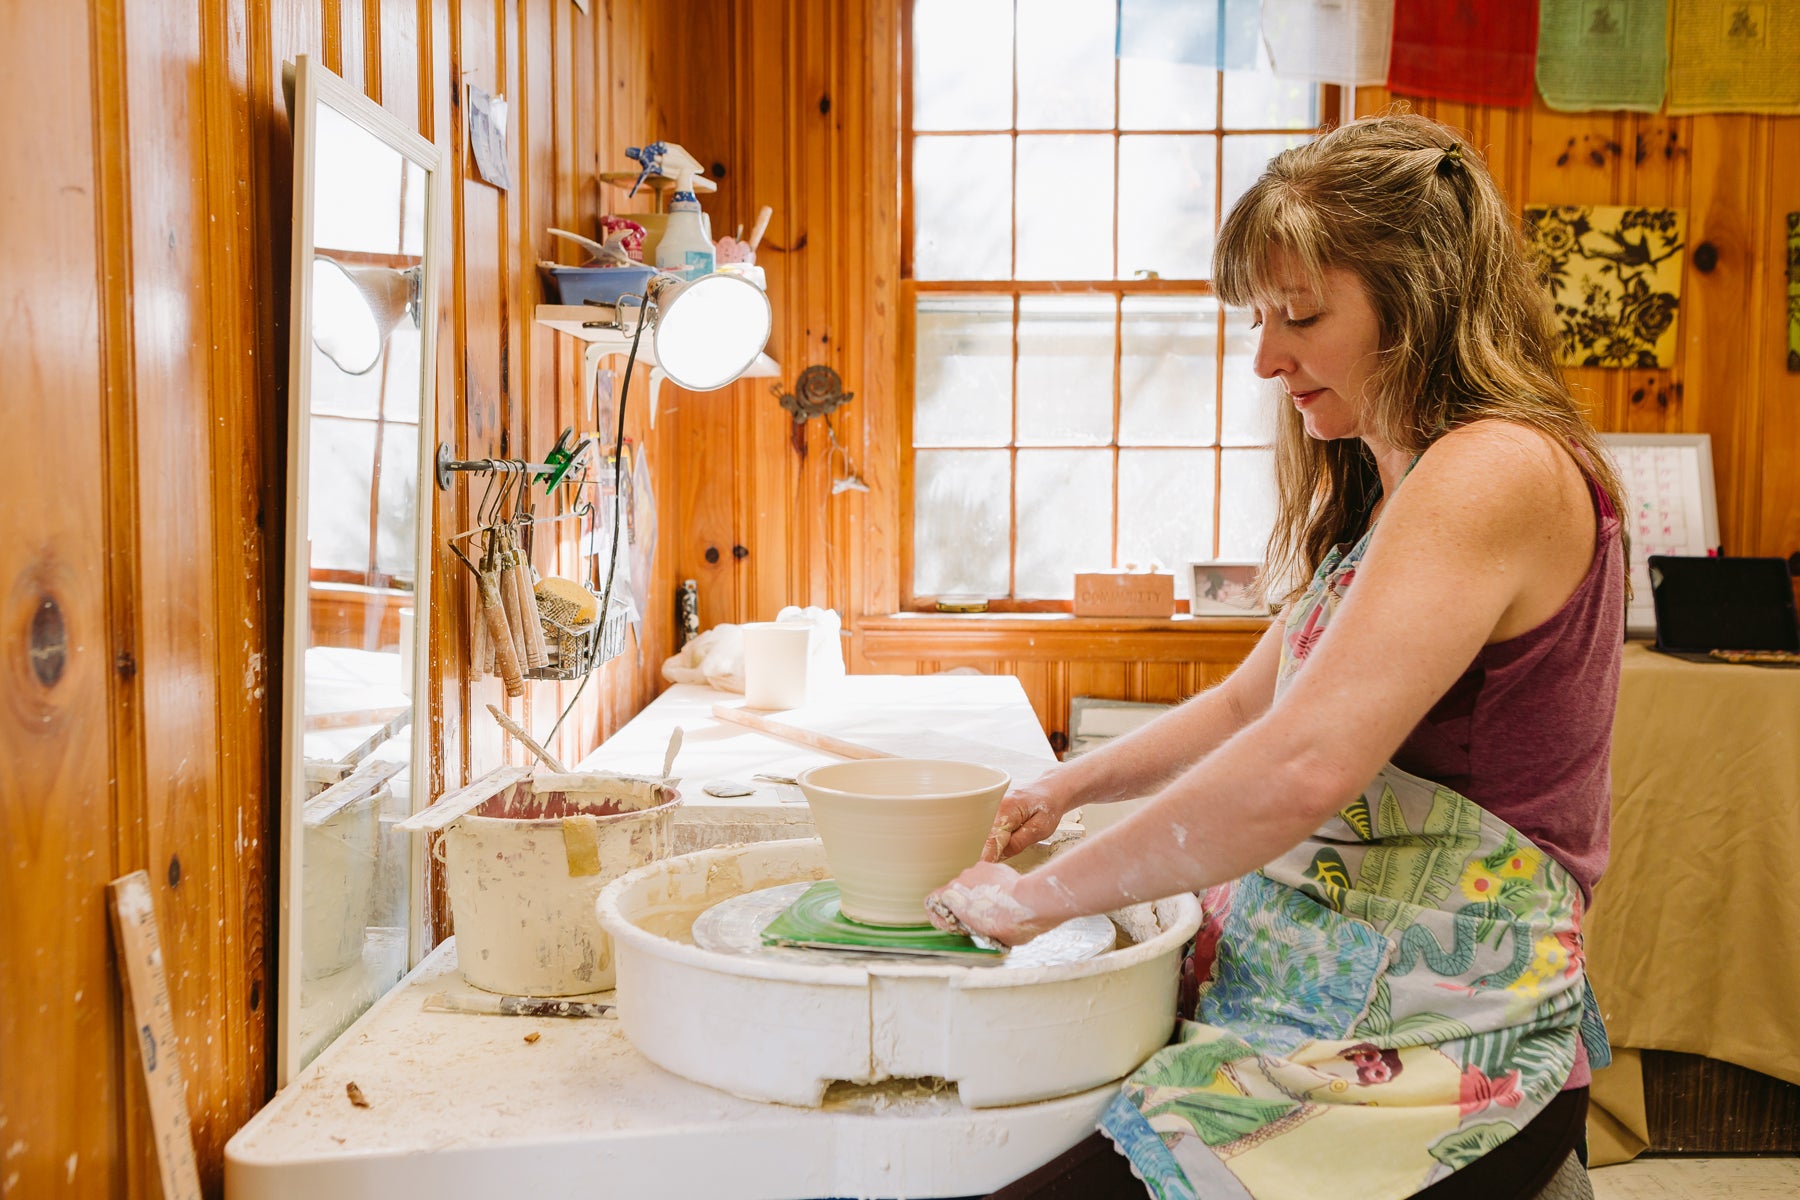 Ceramic artist Julie Wiggins sitting at her potters' wheel in her wood paneled studio, the side of her face towards the camera